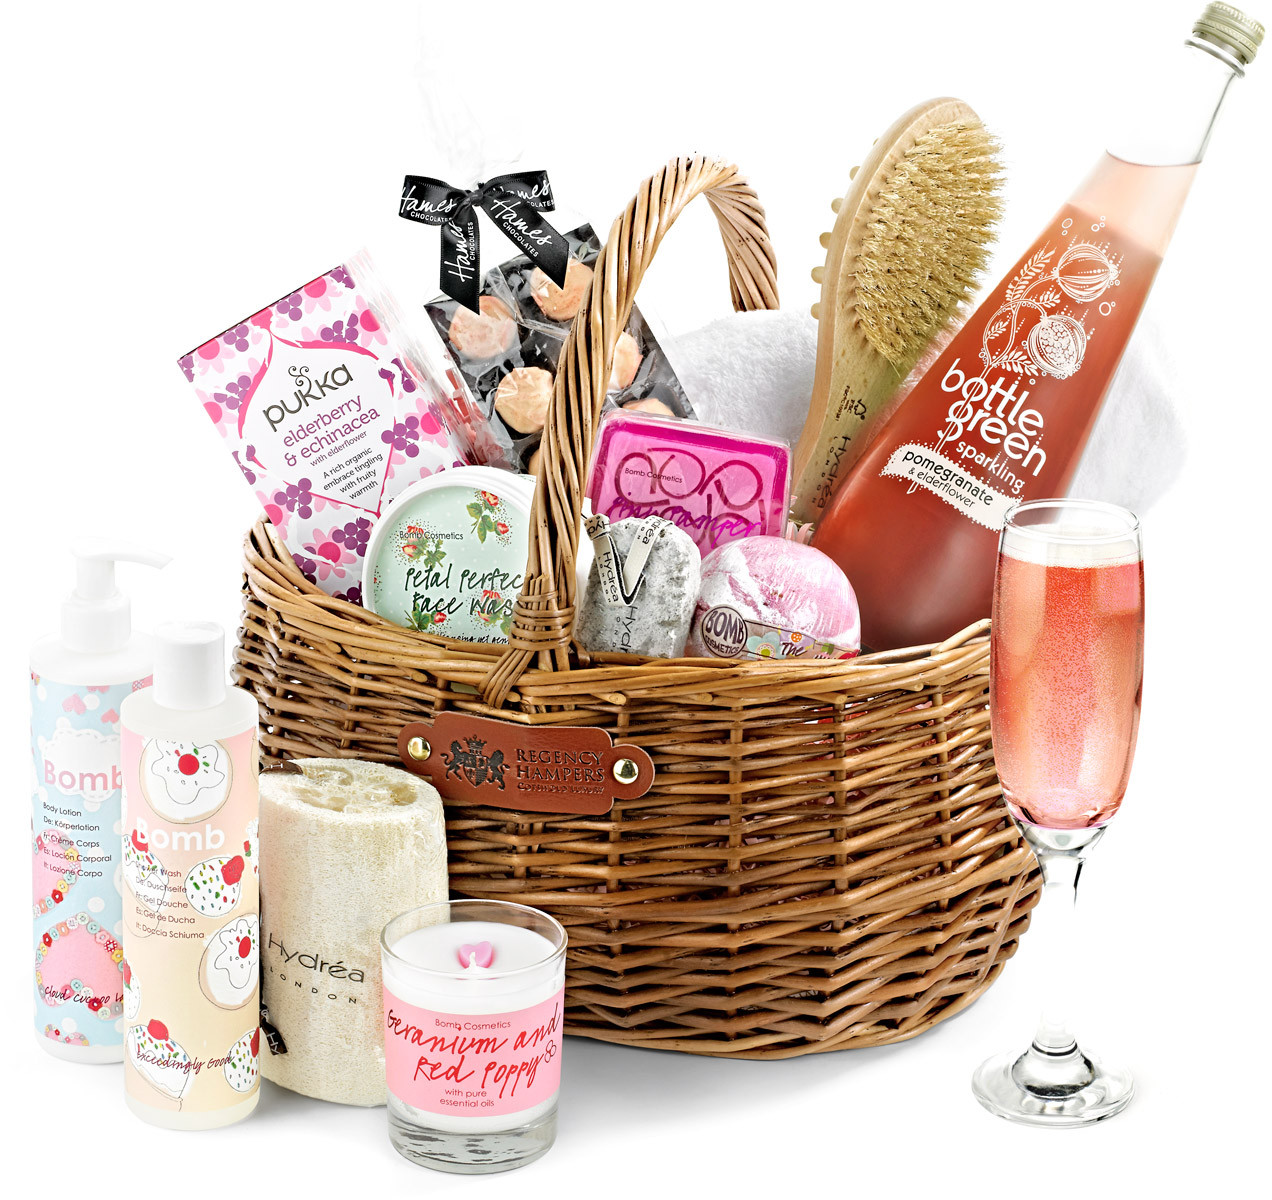 Pampering Gift Basket Ideas
 Luxury Pampering Set Gift Basket With Alcohol Free Pressé